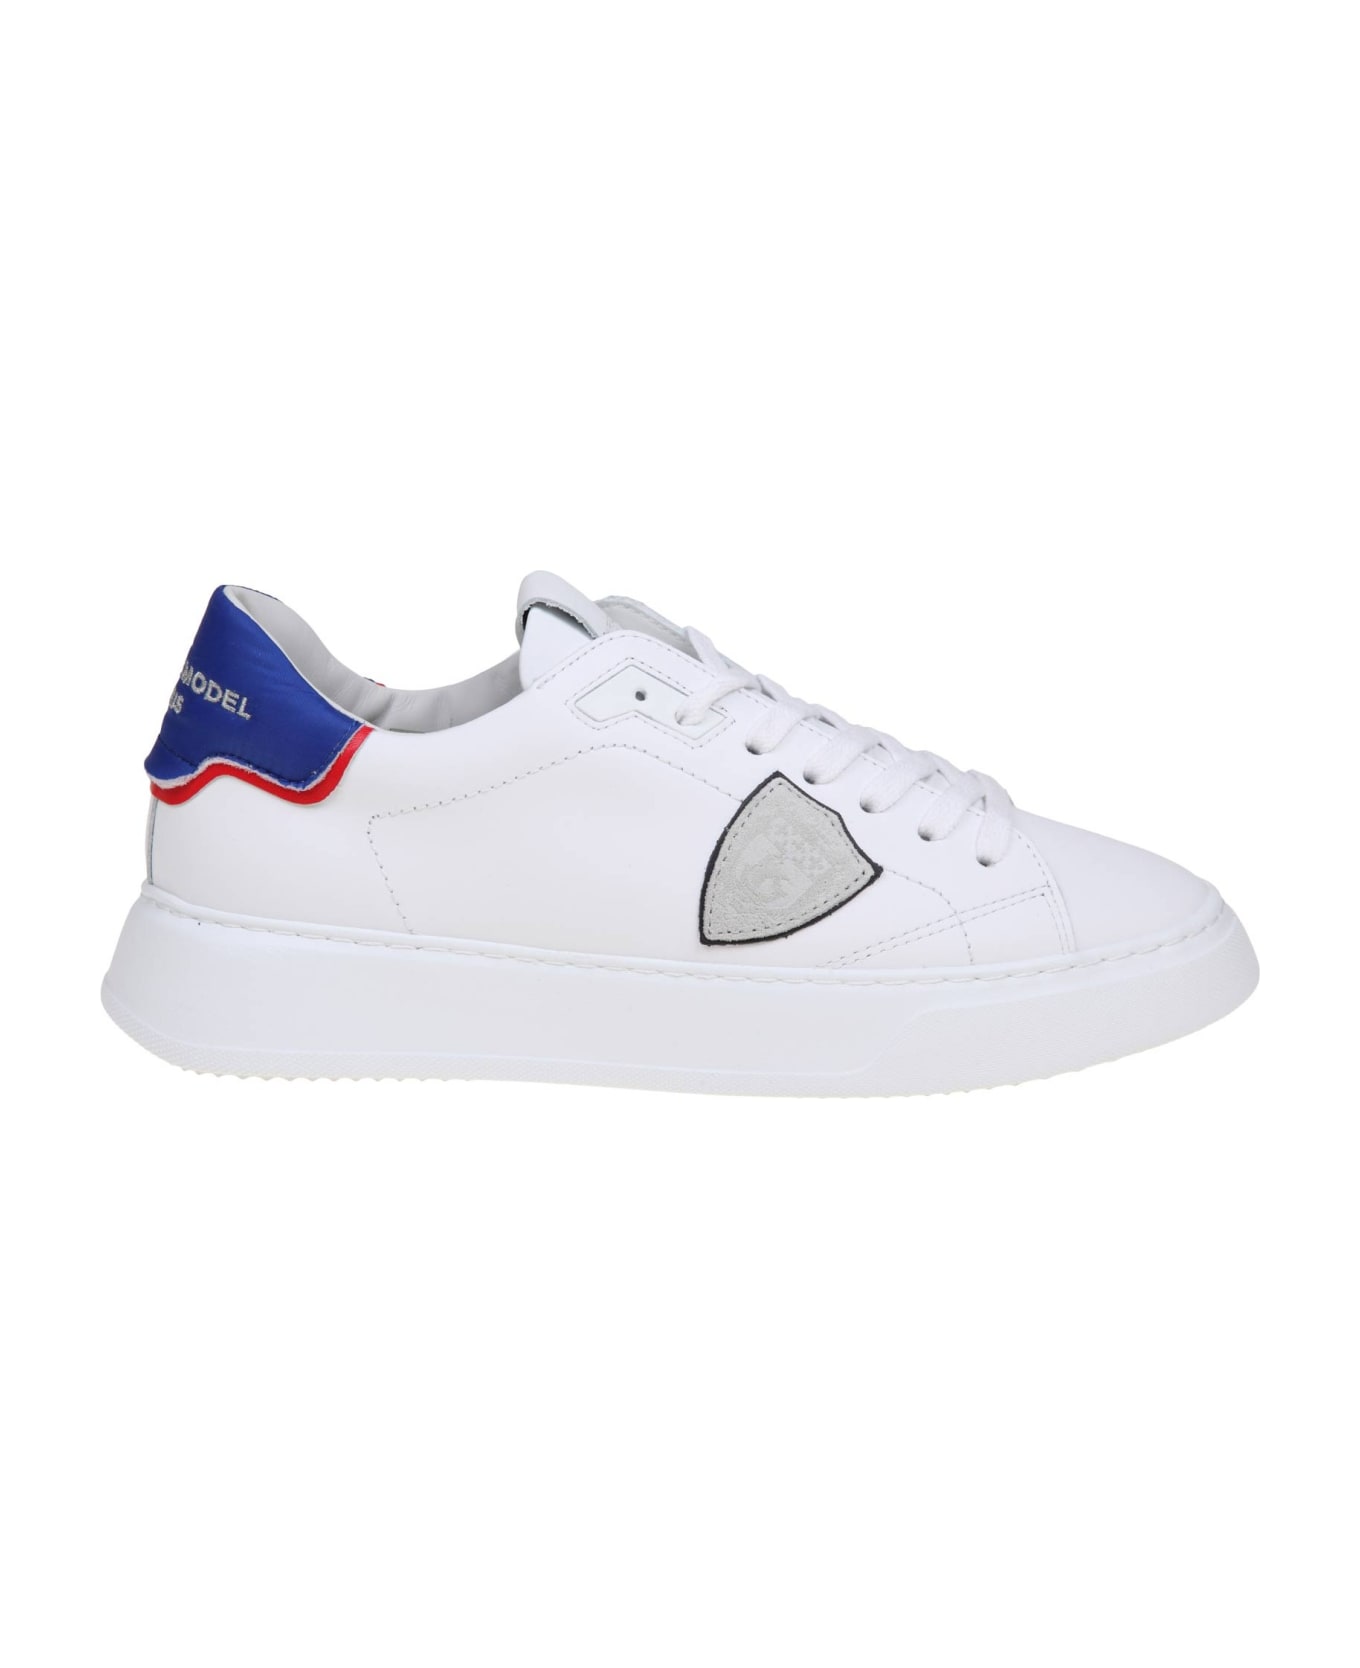 Philippe Model Temple Low Sneakers In White And Blue Leather - WHITE/BLUETTE スニーカー